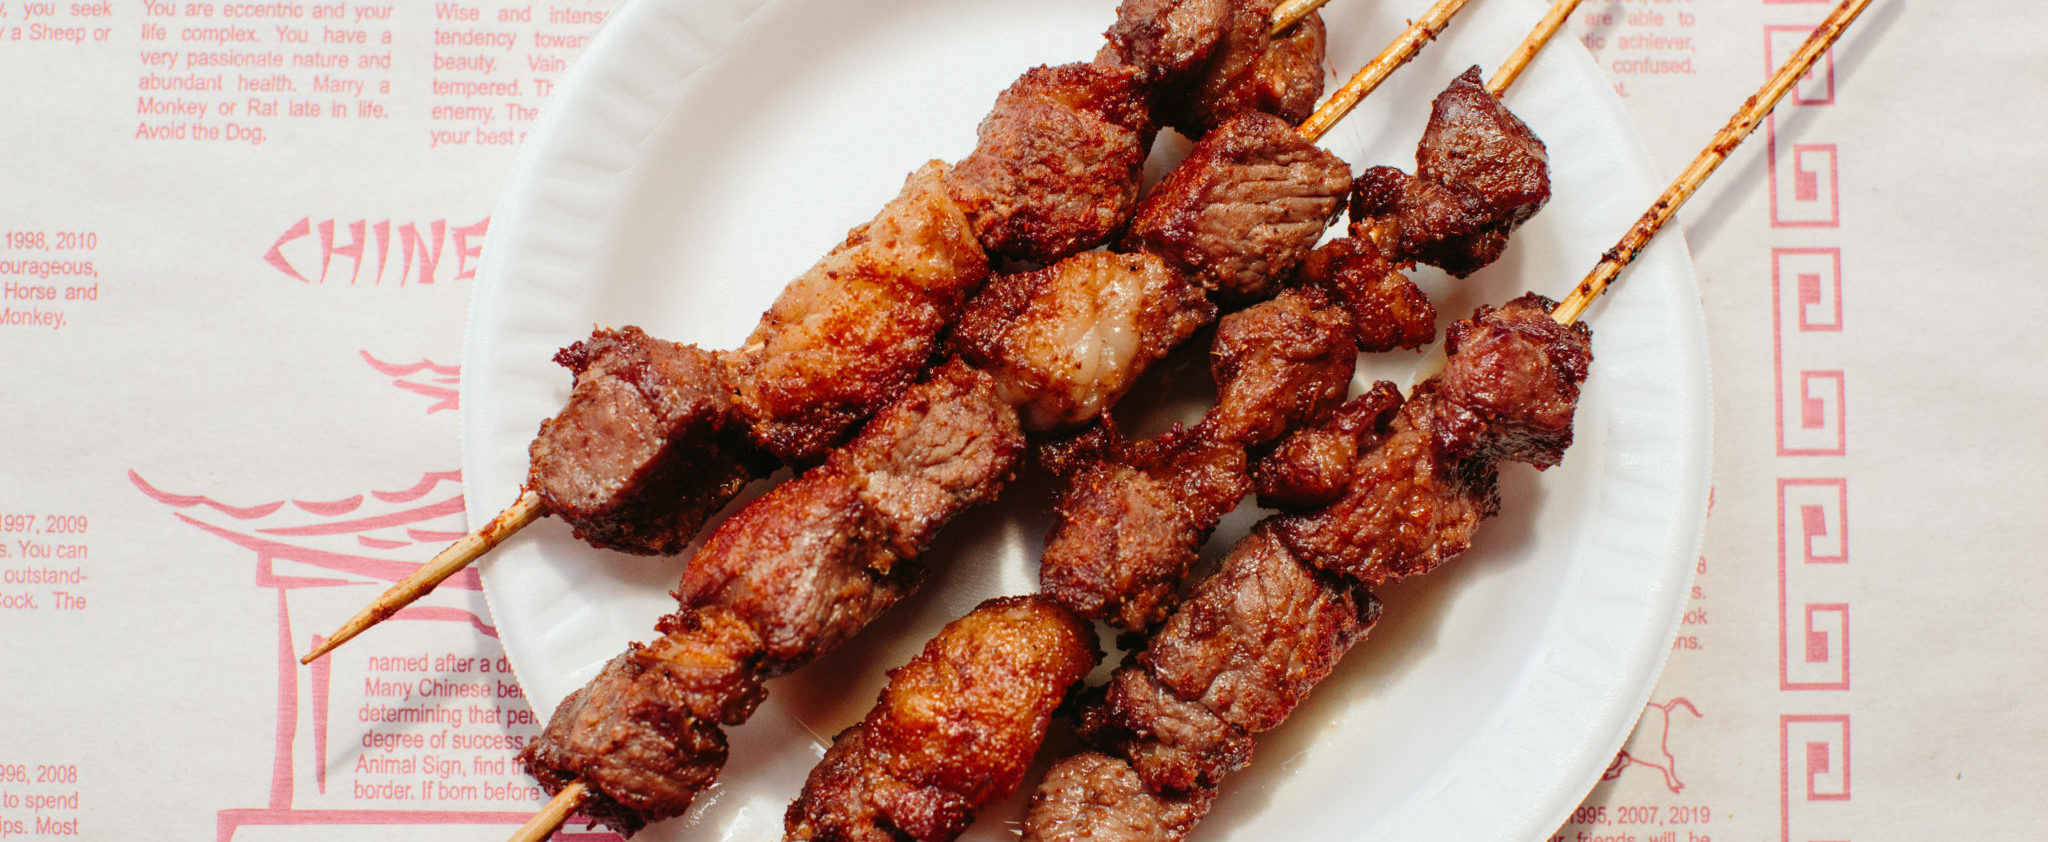 Lamb skewers from Gene's Chinese Flatbread Cafe